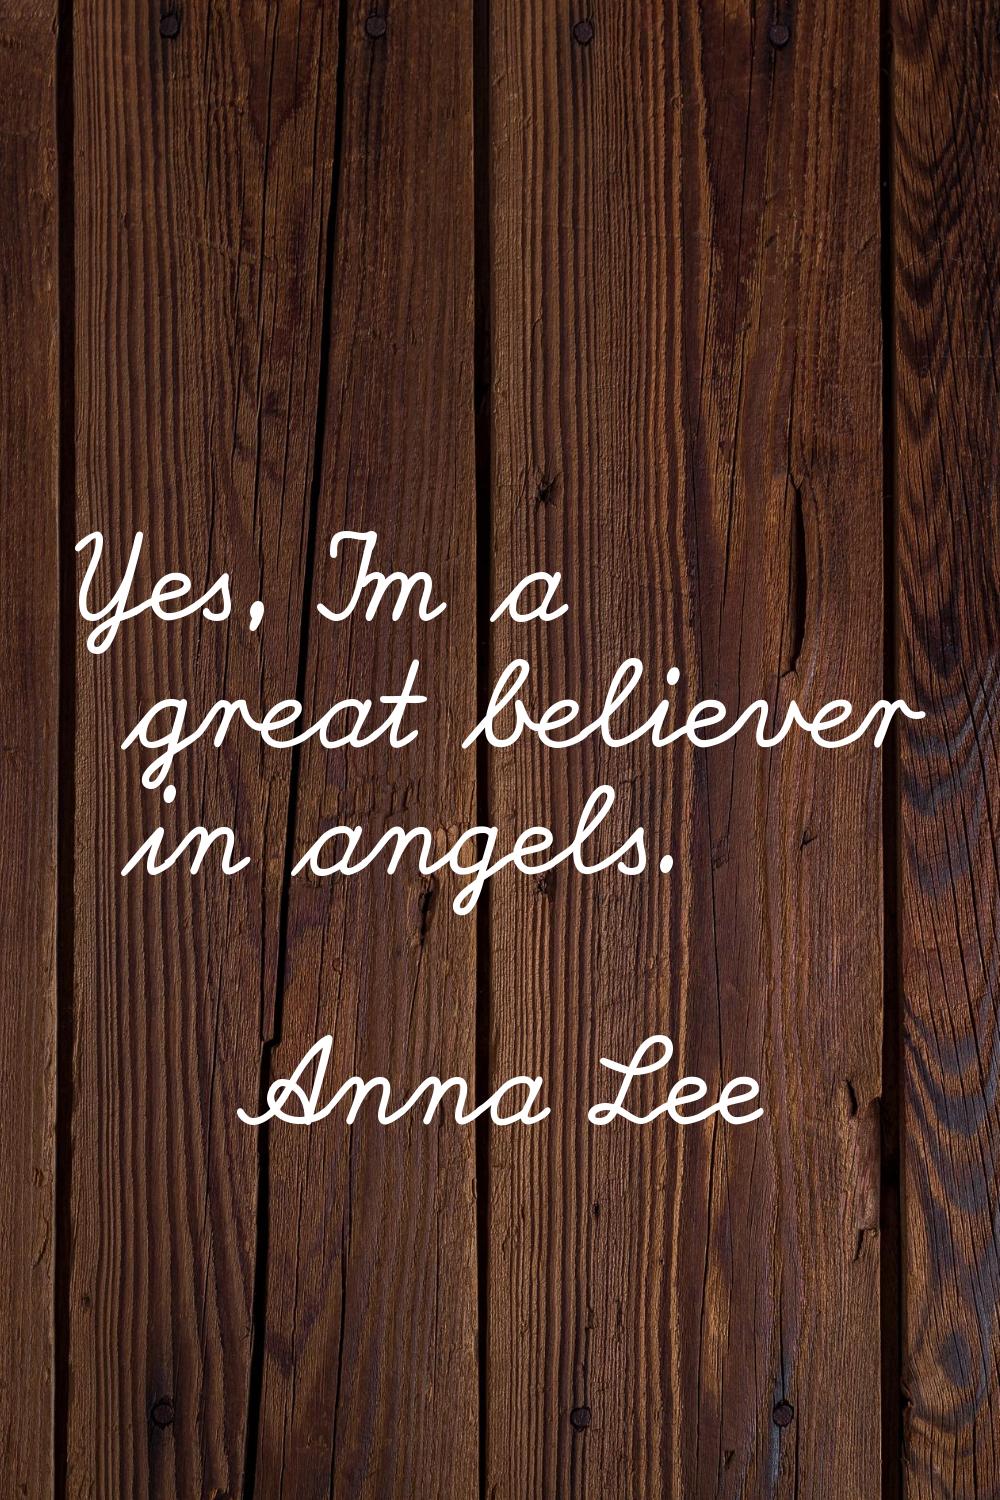 Yes, I'm a great believer in angels.